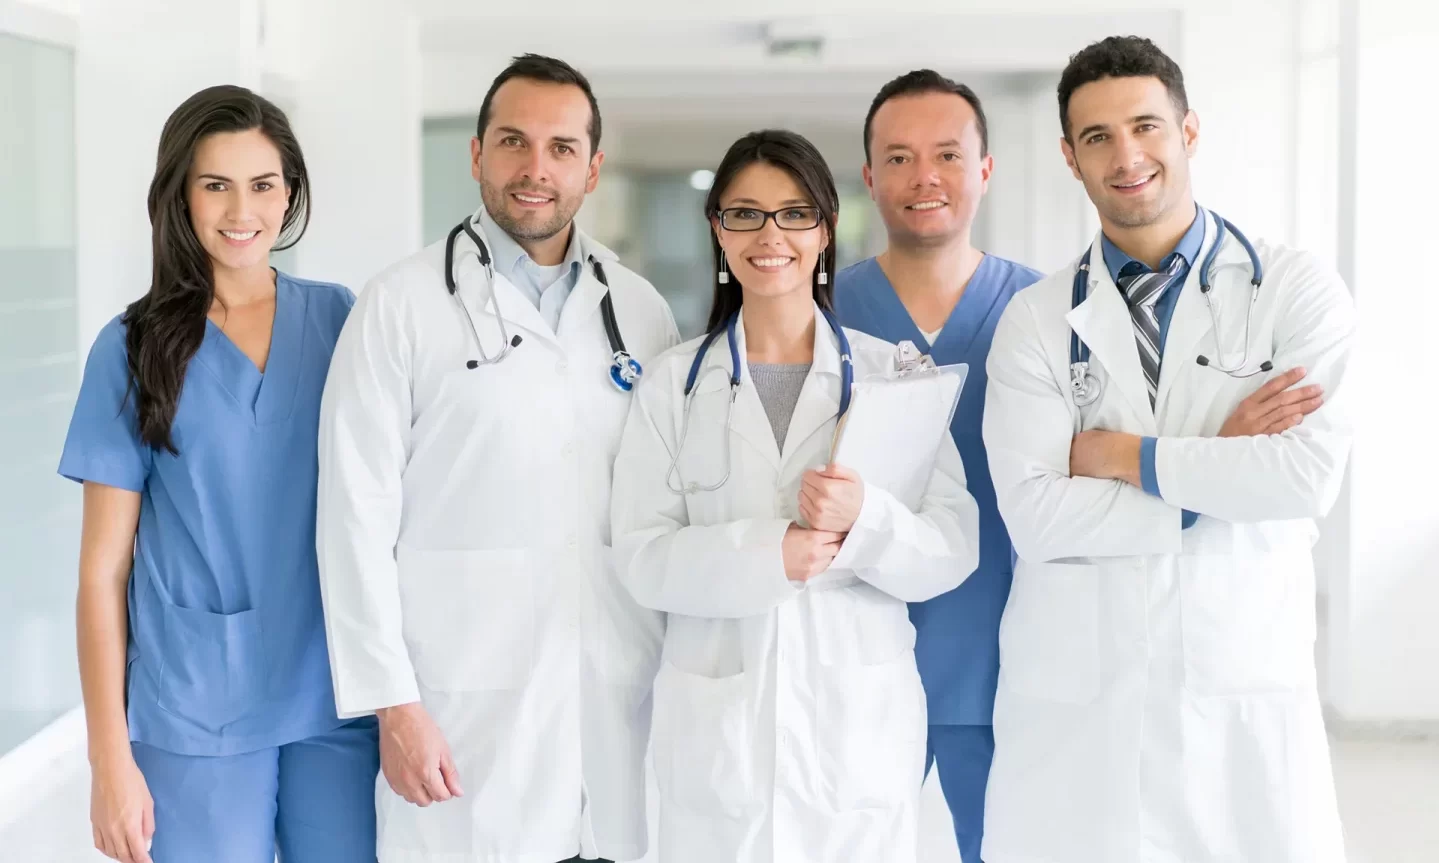 a team of medical specialists who perform PRP injection treatment to patients